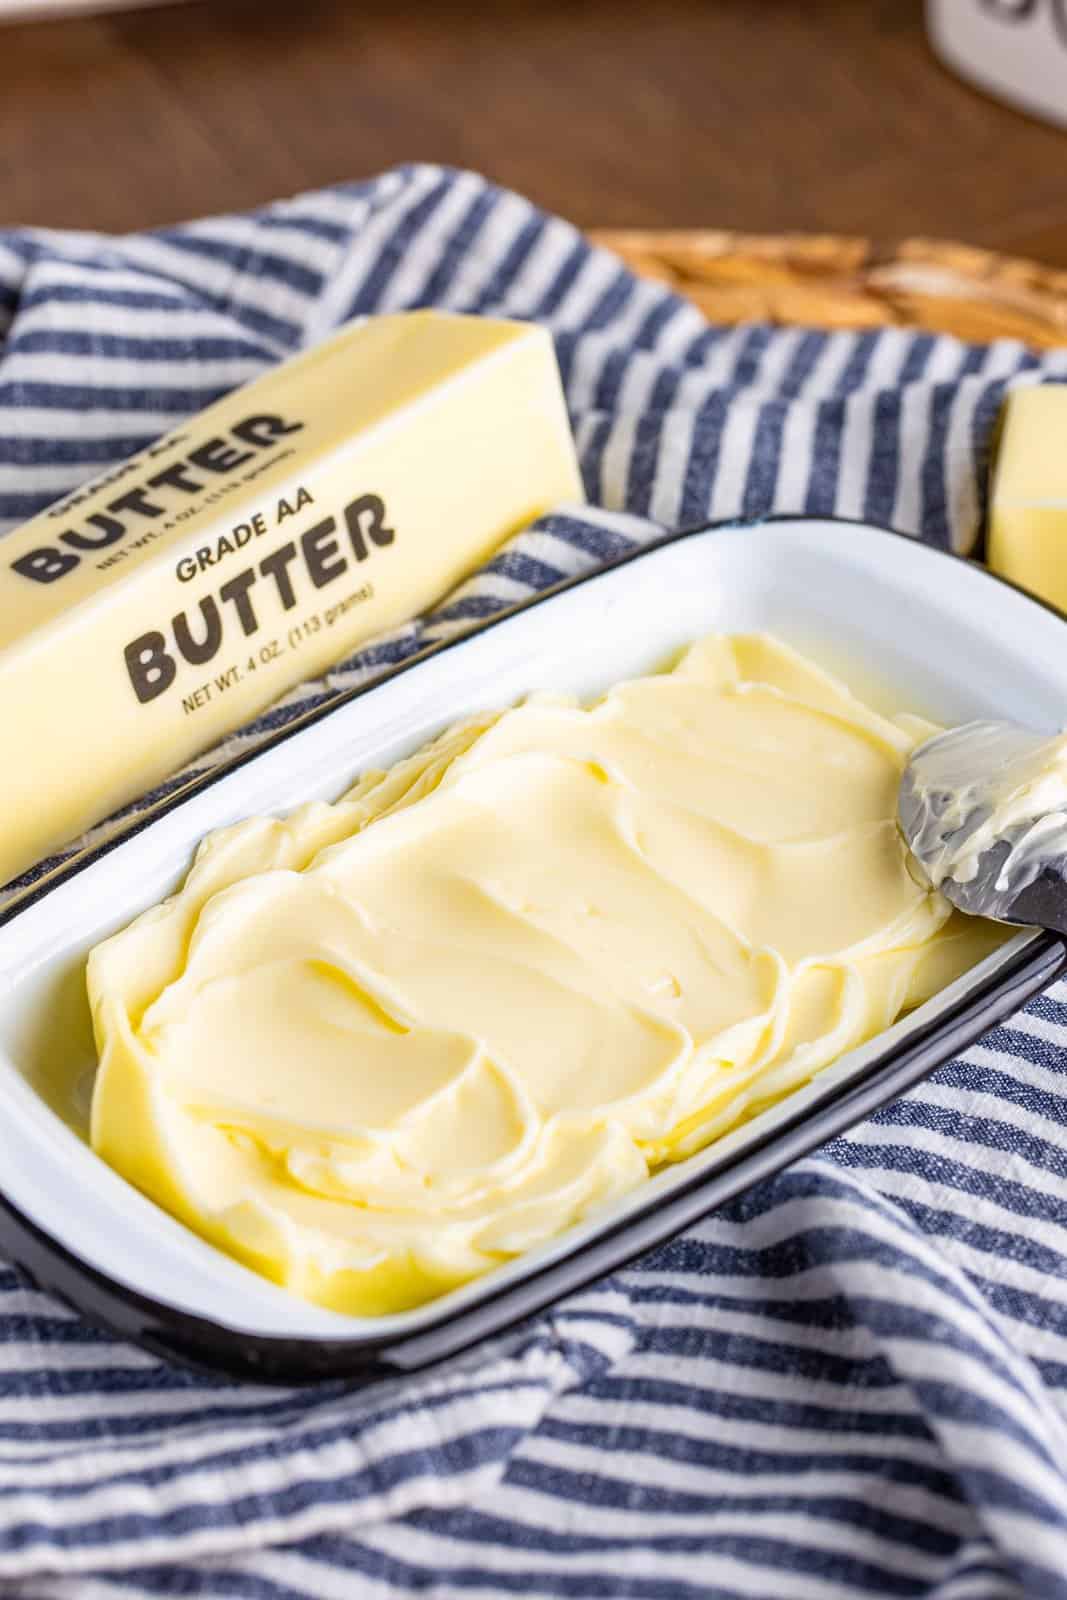 Smoothed out butter in a dish.